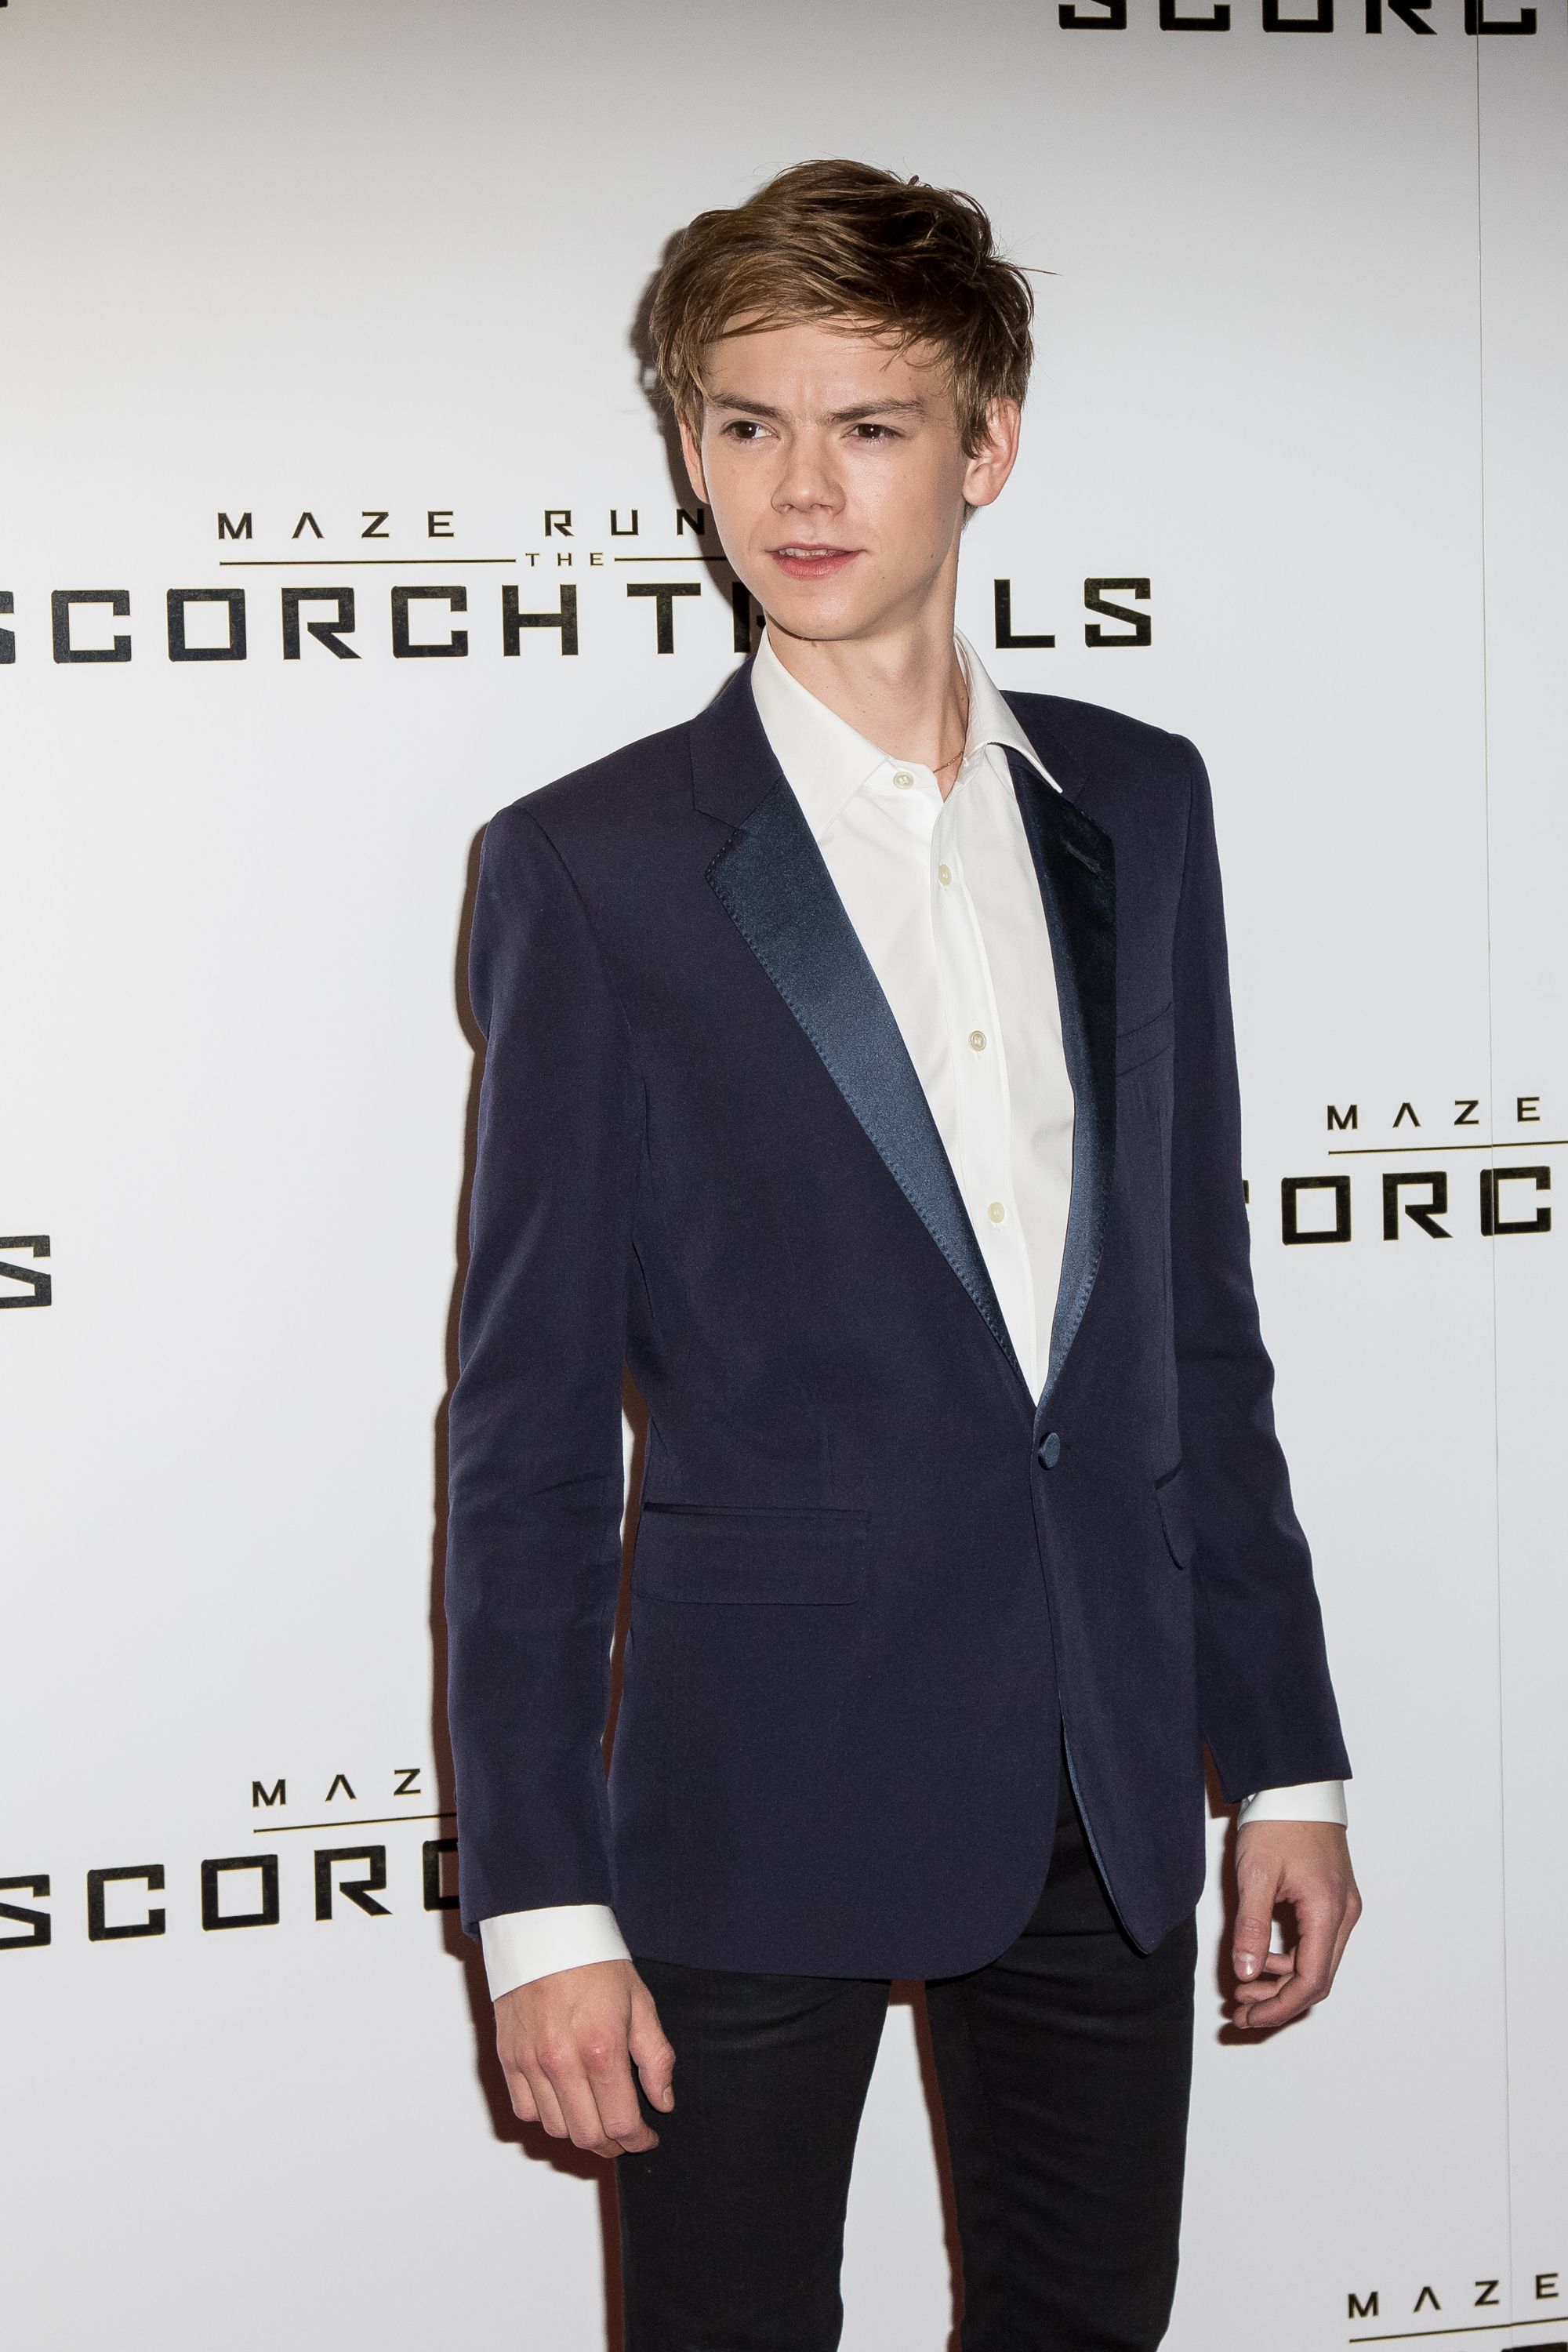 mar — new thomas sangster photos as benny watts from the